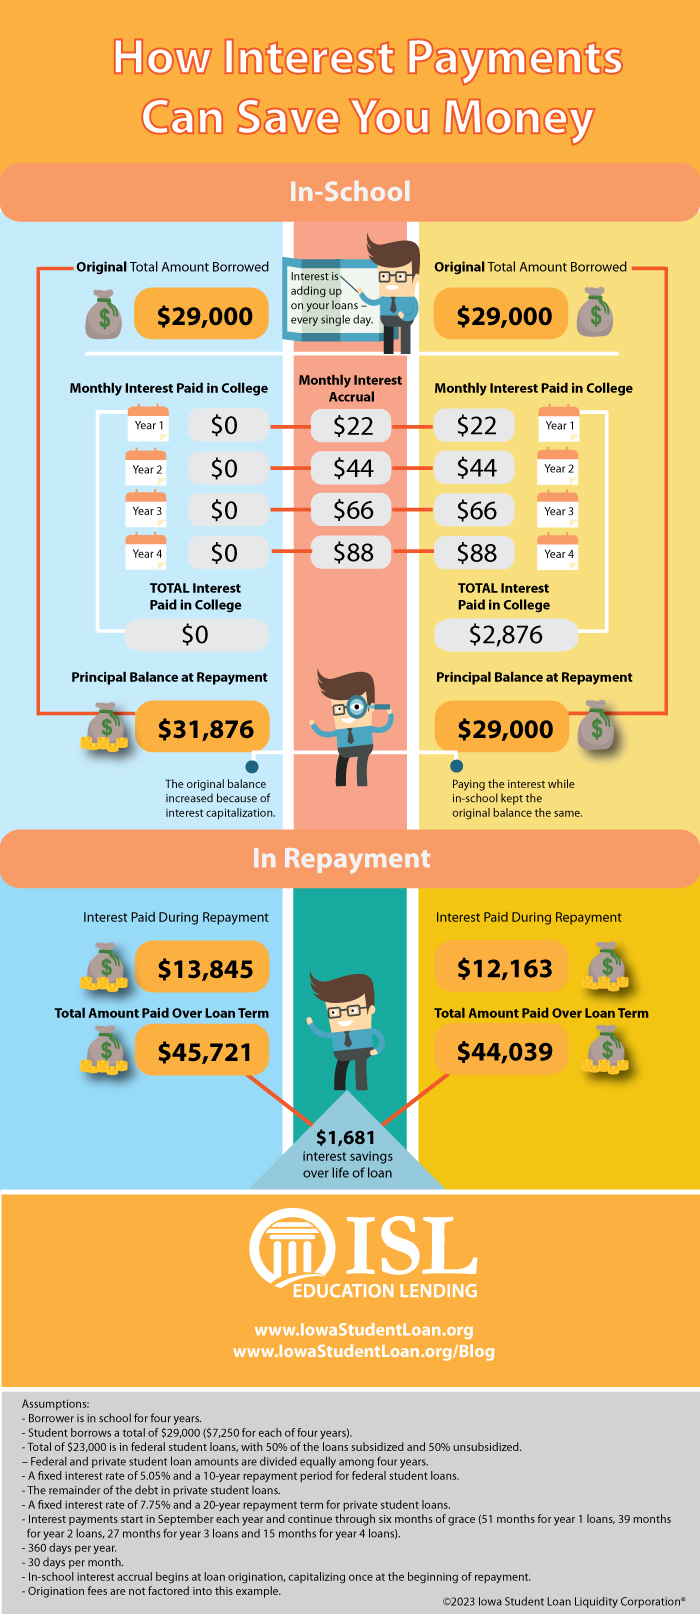 large graphic showing how with a loan of $29,000 over four years, a person can save $1,681 in interest over the life of the loan by paying $2,876 interest during college